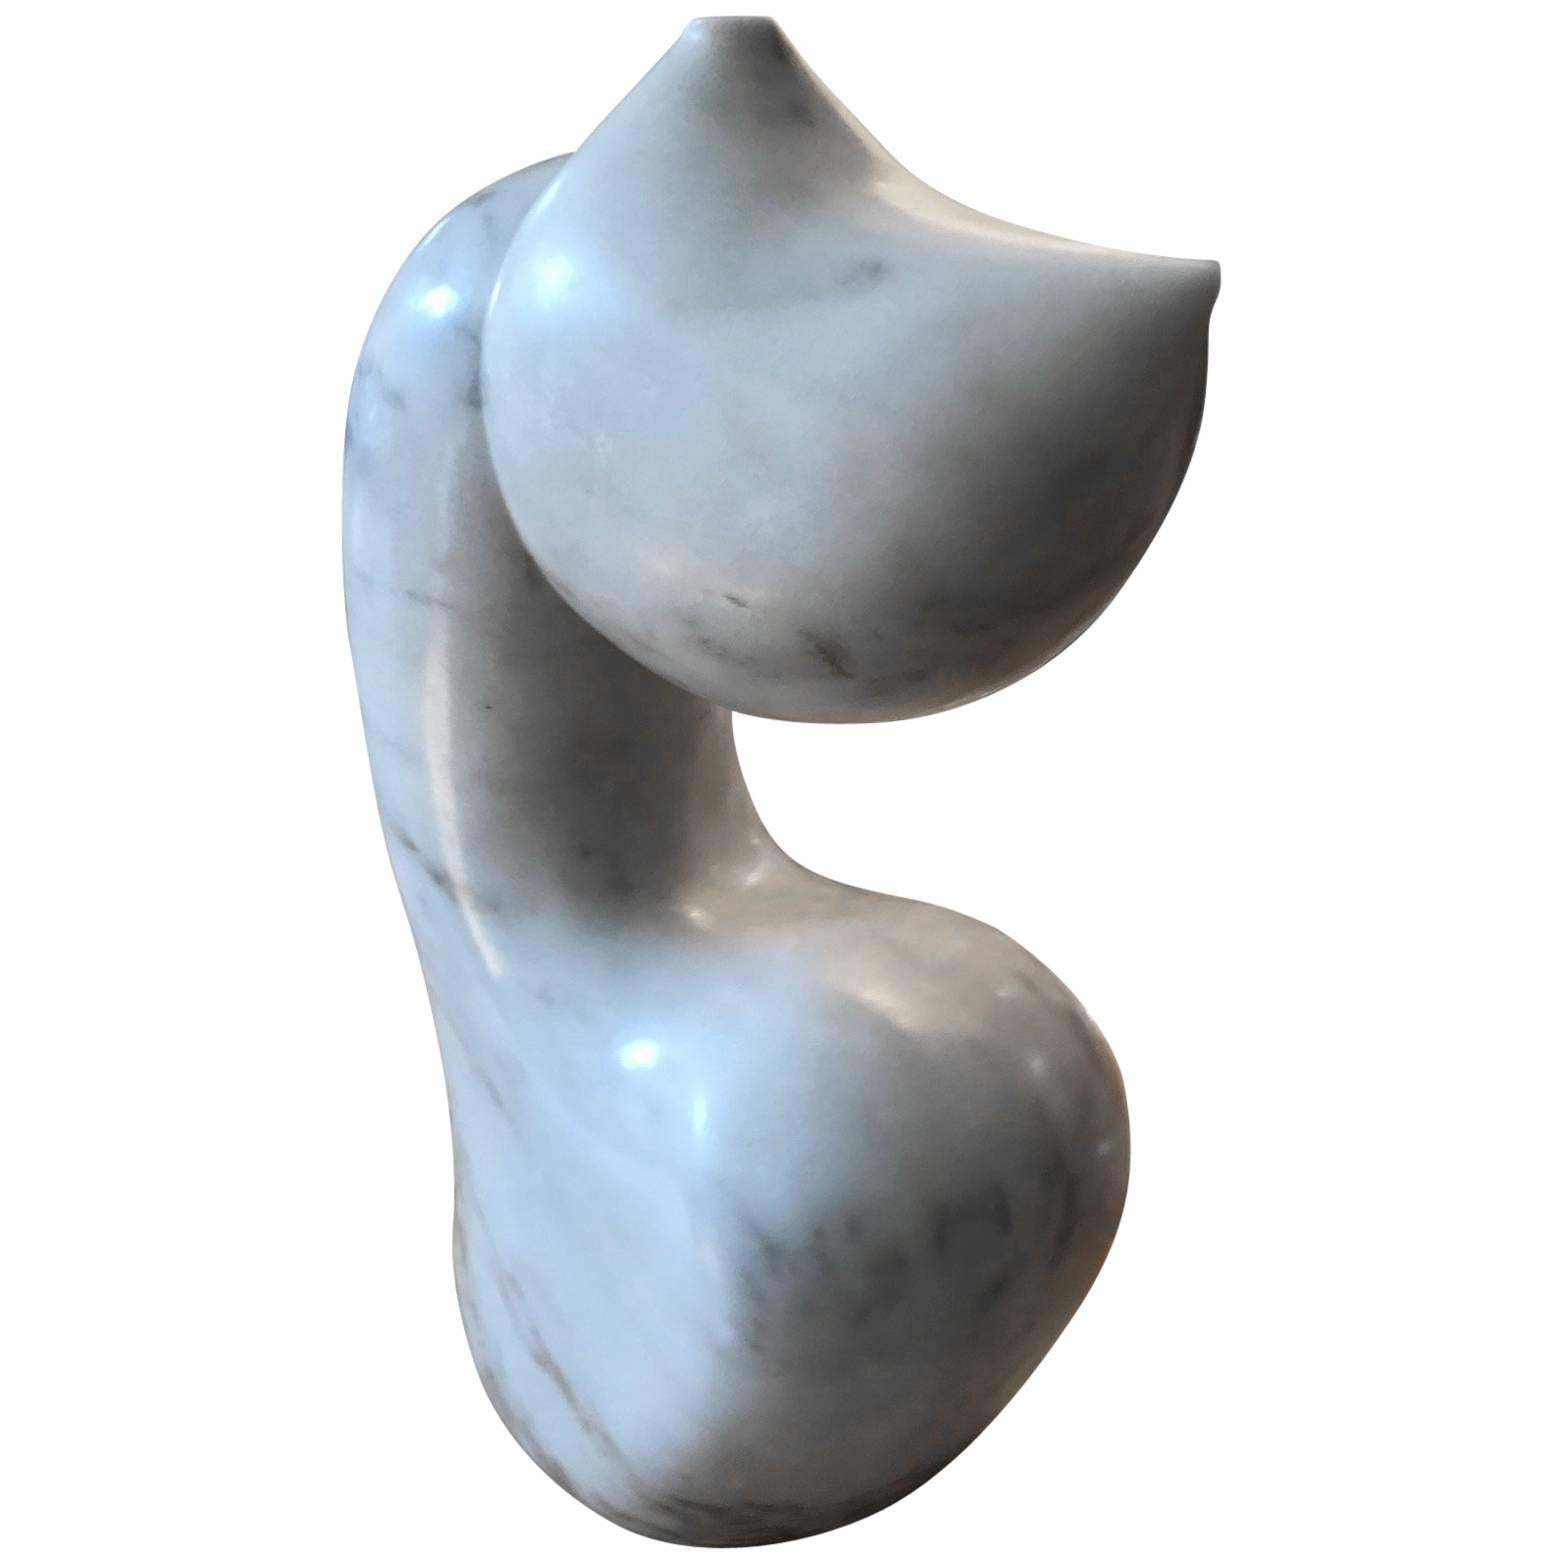  Abstract Biomorphic White Marble Sculpture by Mario Denoto